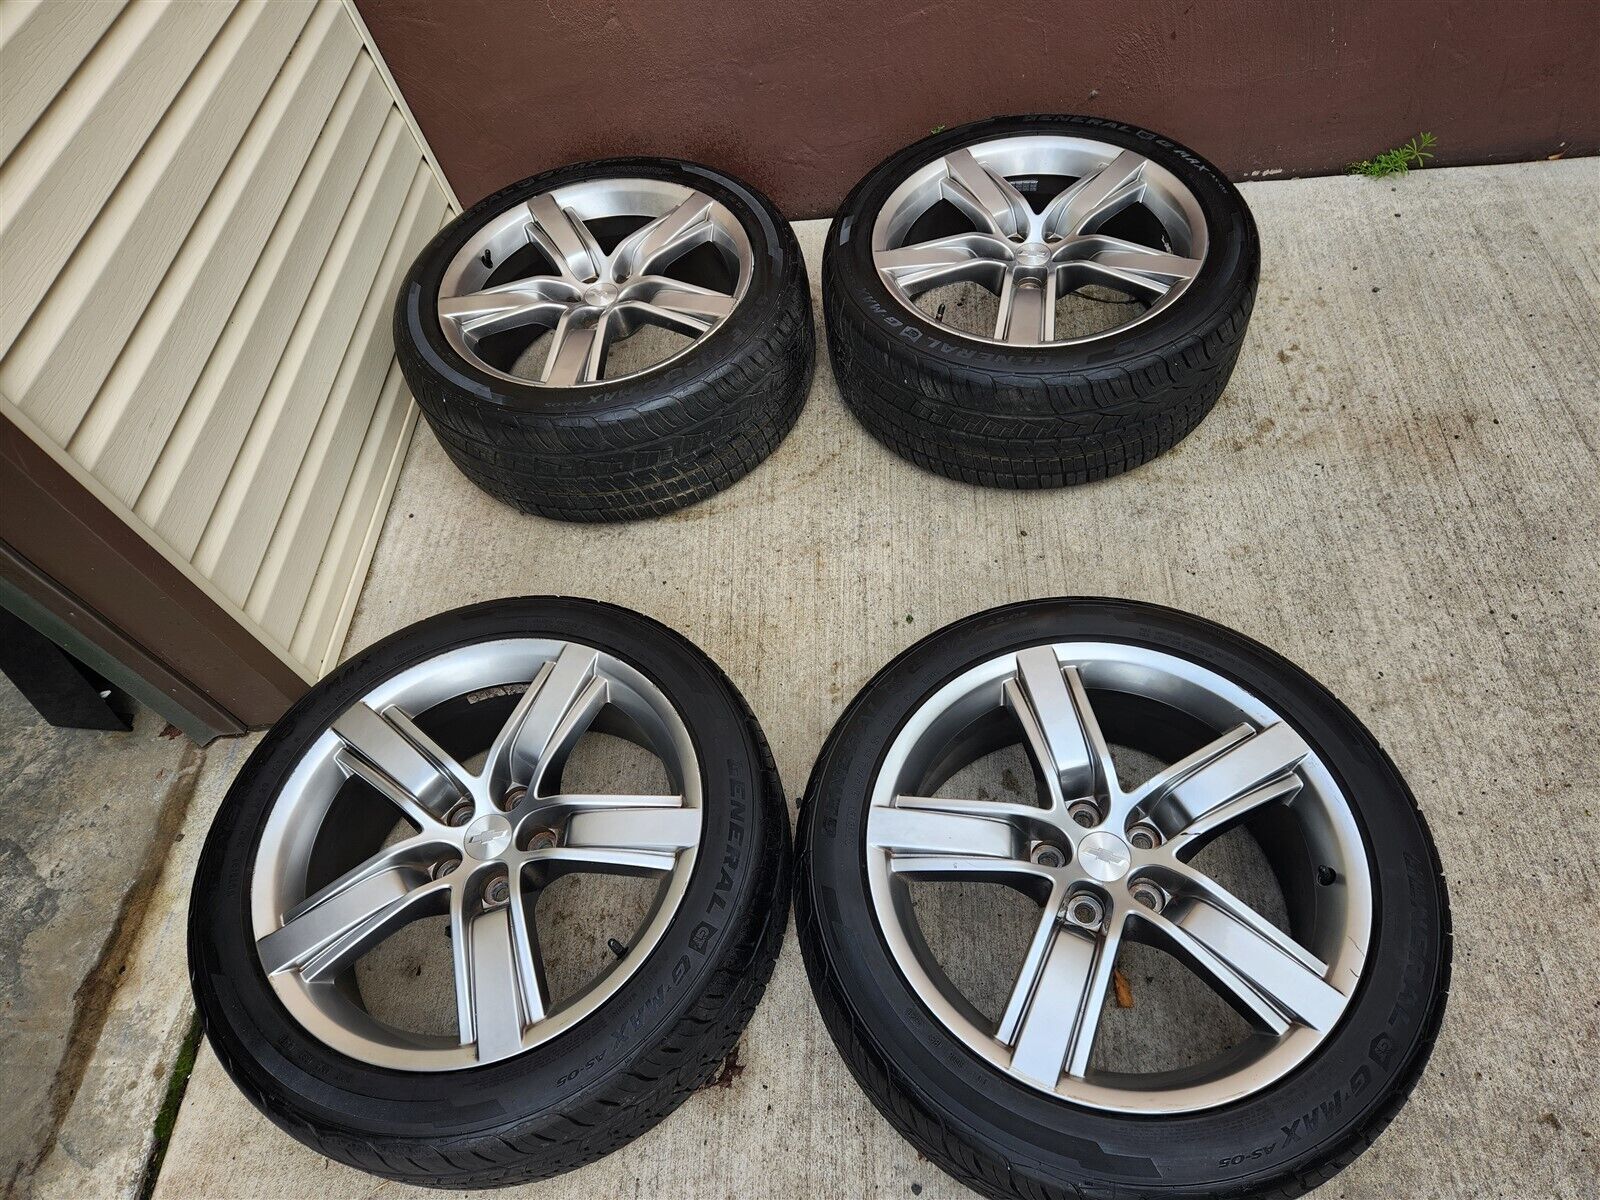 2012 Camaro SS 20 Inch Rims 45th Anniversary Wheels Set of FOUR w/ General Tires